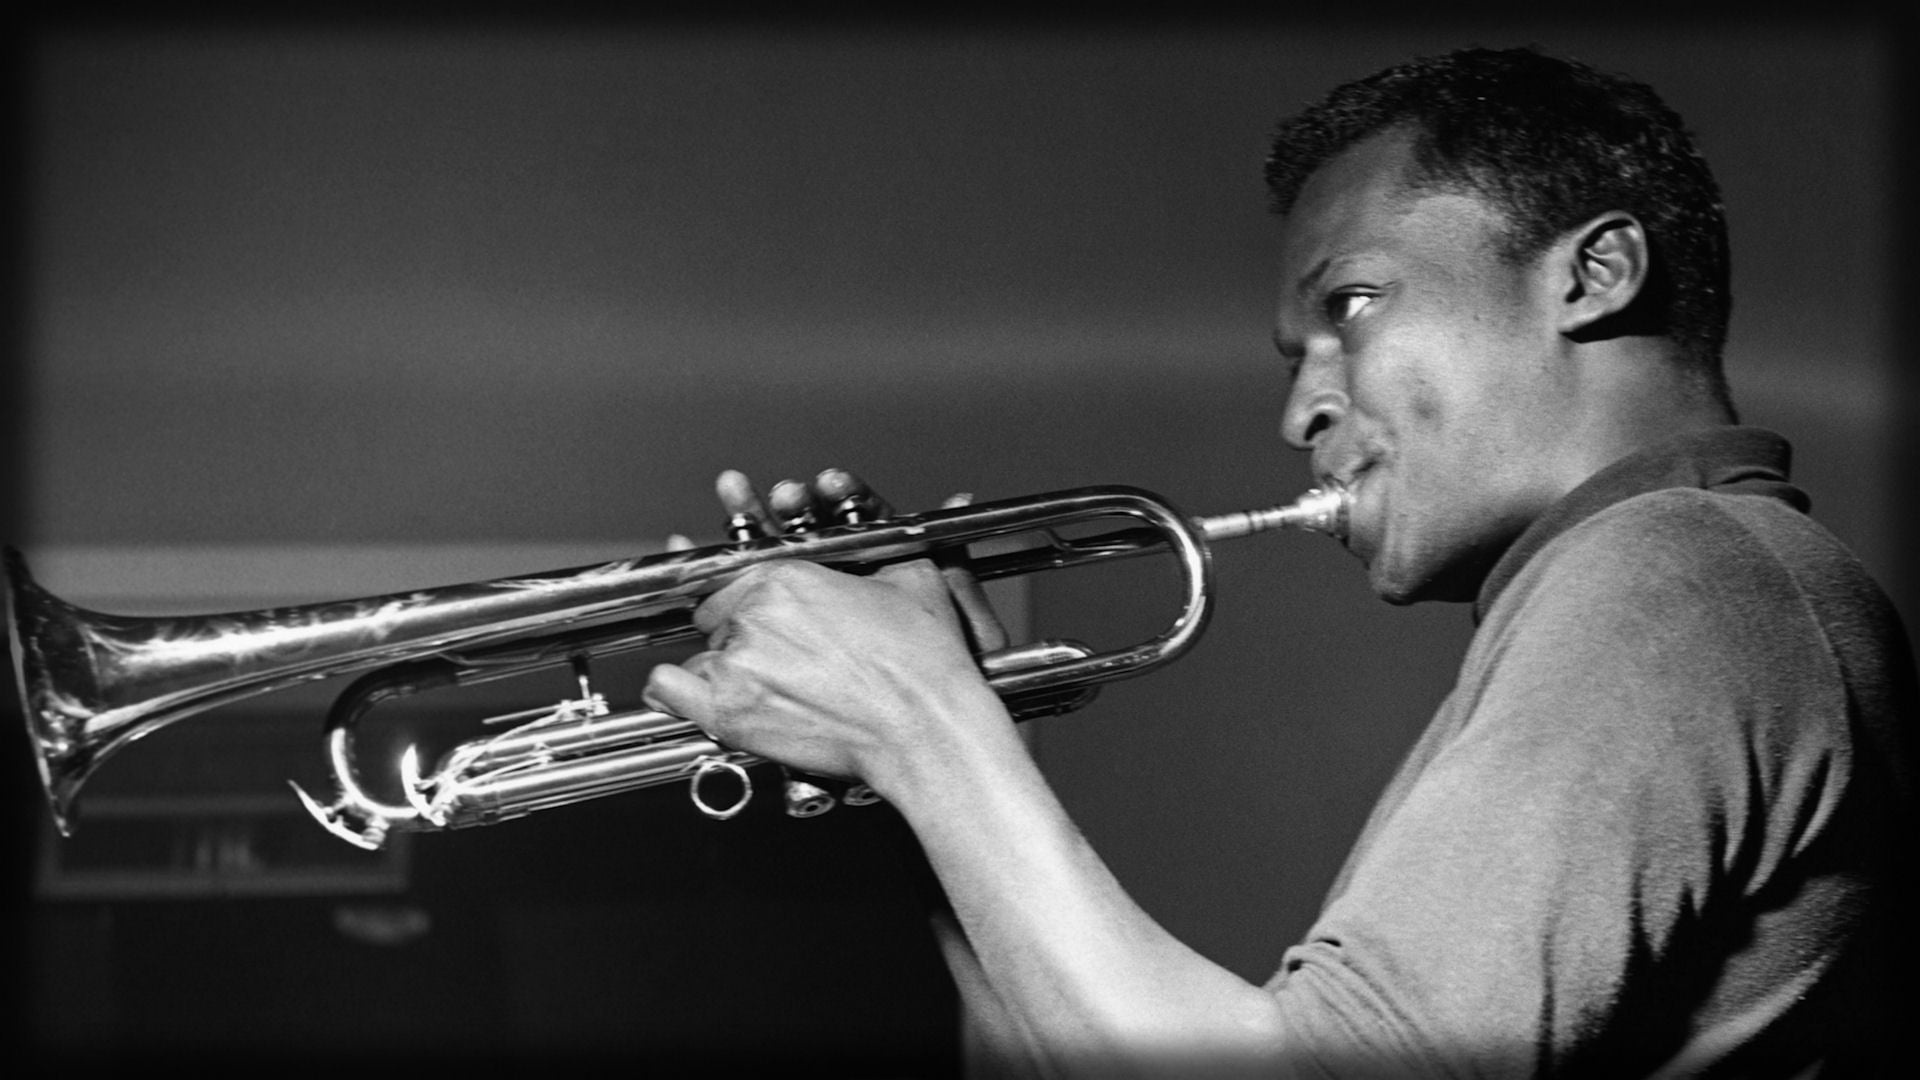 Trumpet: Miles Davis, The King of Jazz, An American trumpeter, bandleader, and composer. 1920x1080 Full HD Background.